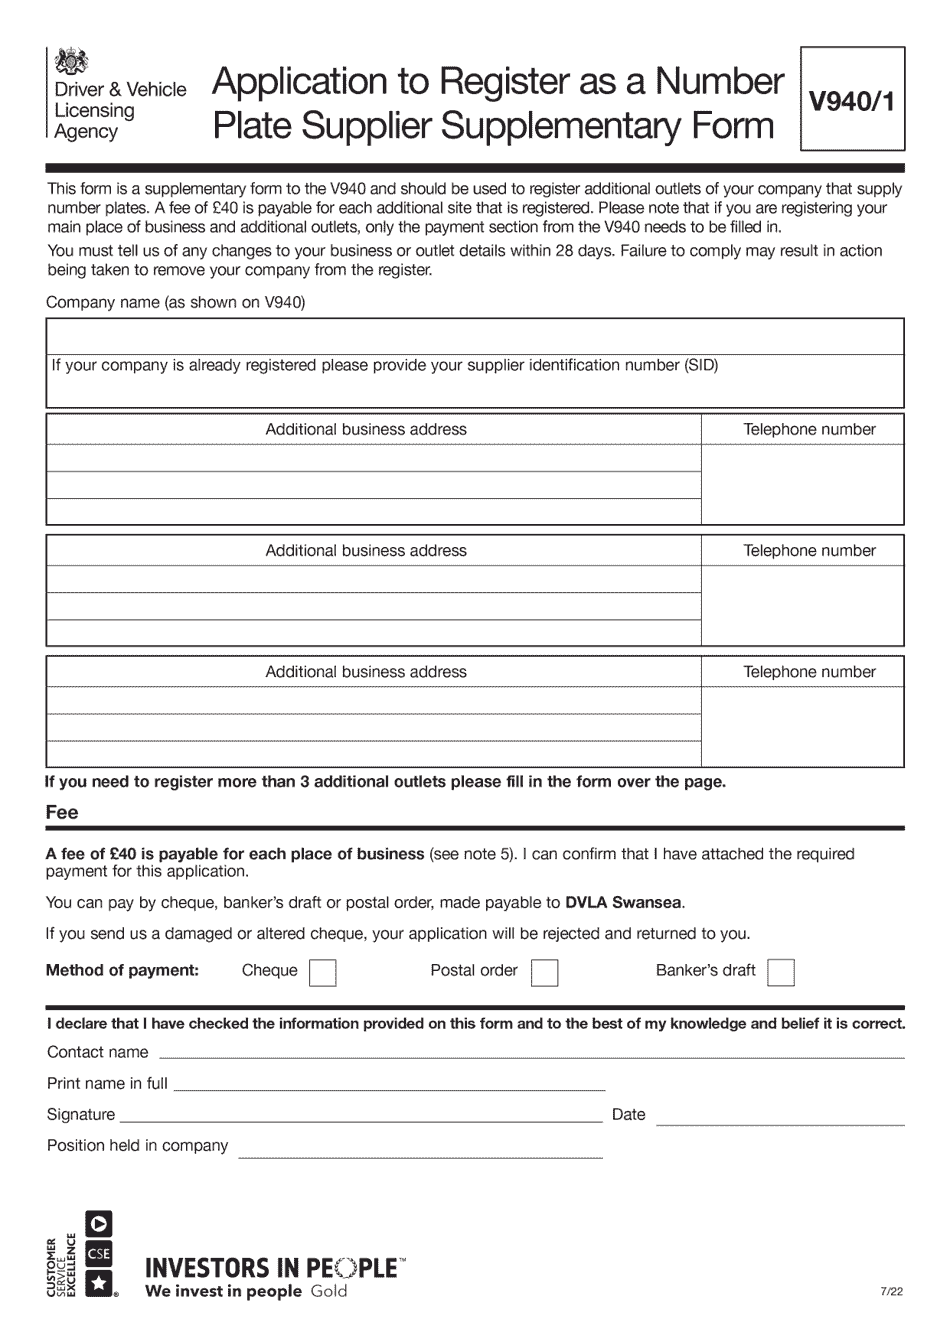 Form V940 / 1 Application to Register as a Number Plate Supplier Supplementary Form - United Kingdom, Page 1